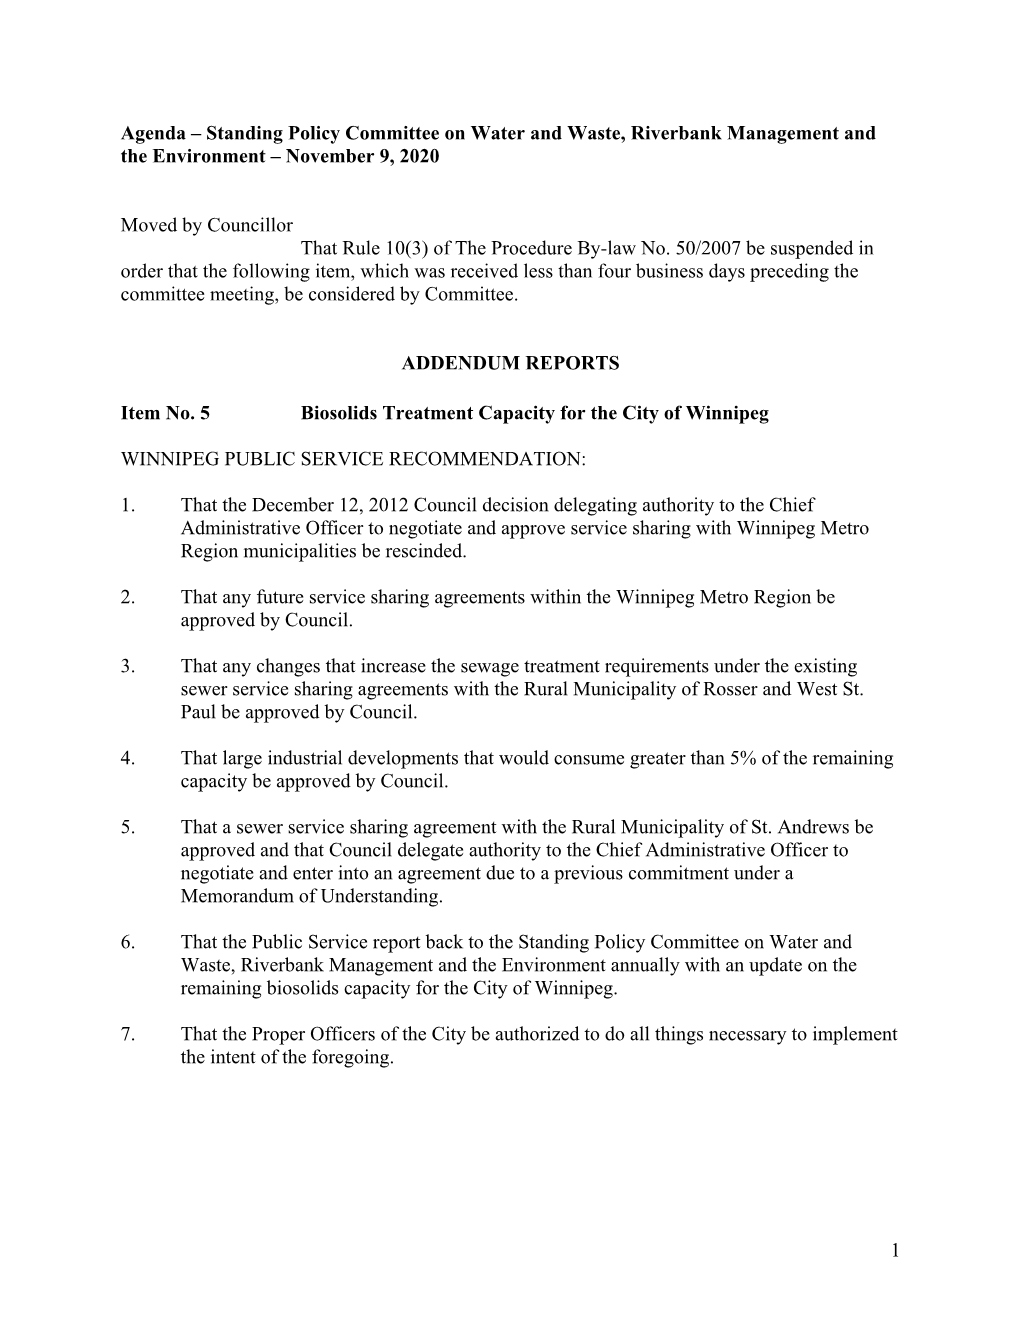 Standing Policy Committee on Water and Waste, Riverbank Management and the Environment – November 9, 2020